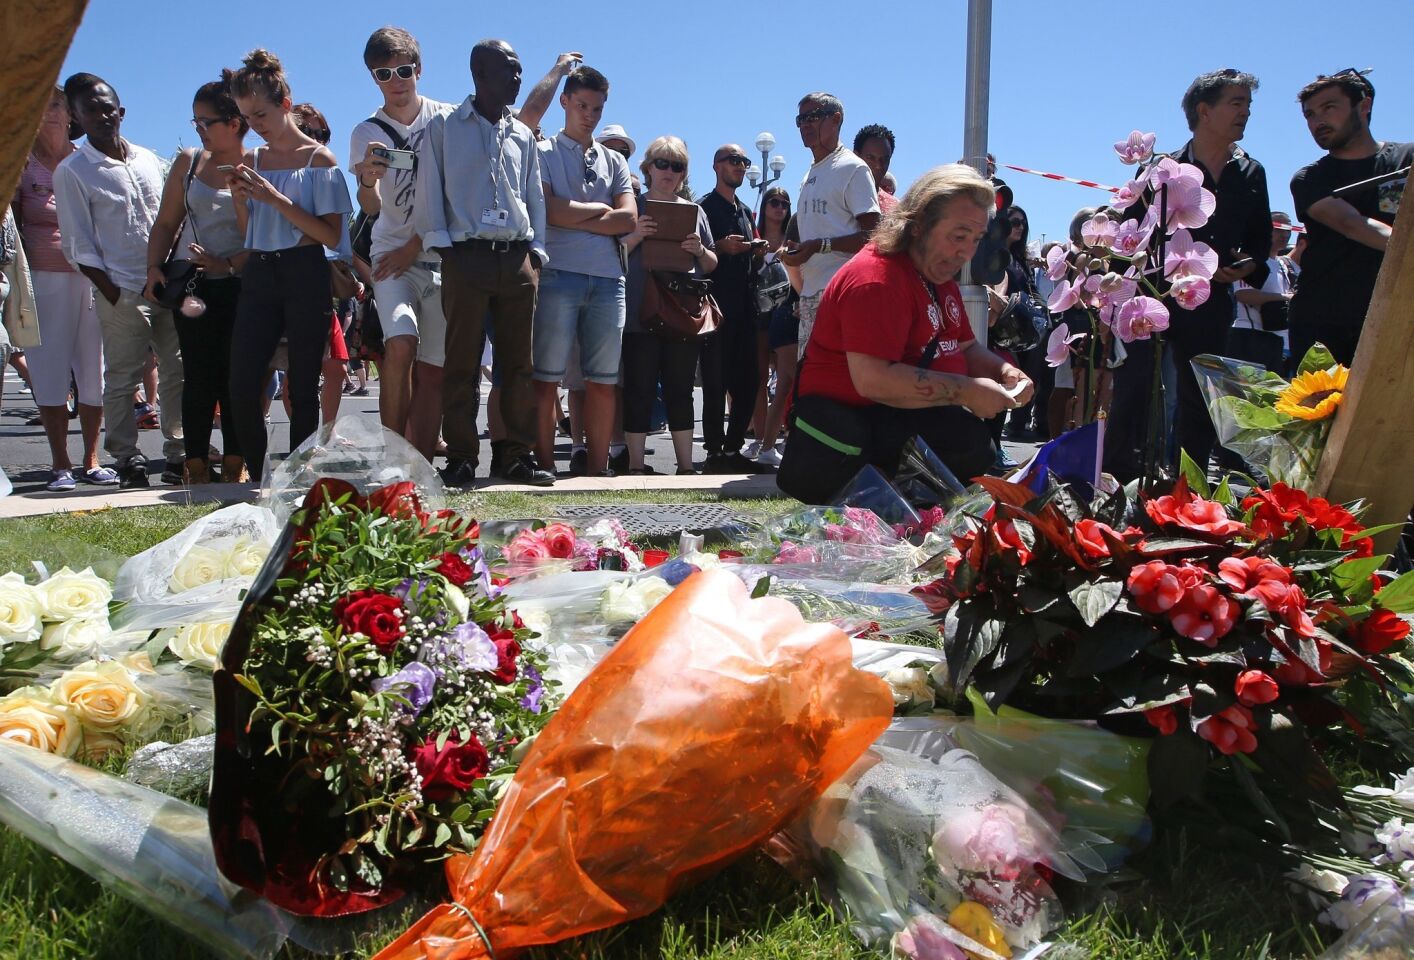 Floral tributes are placed near the site of the truck attack in the French resort city of Nice.